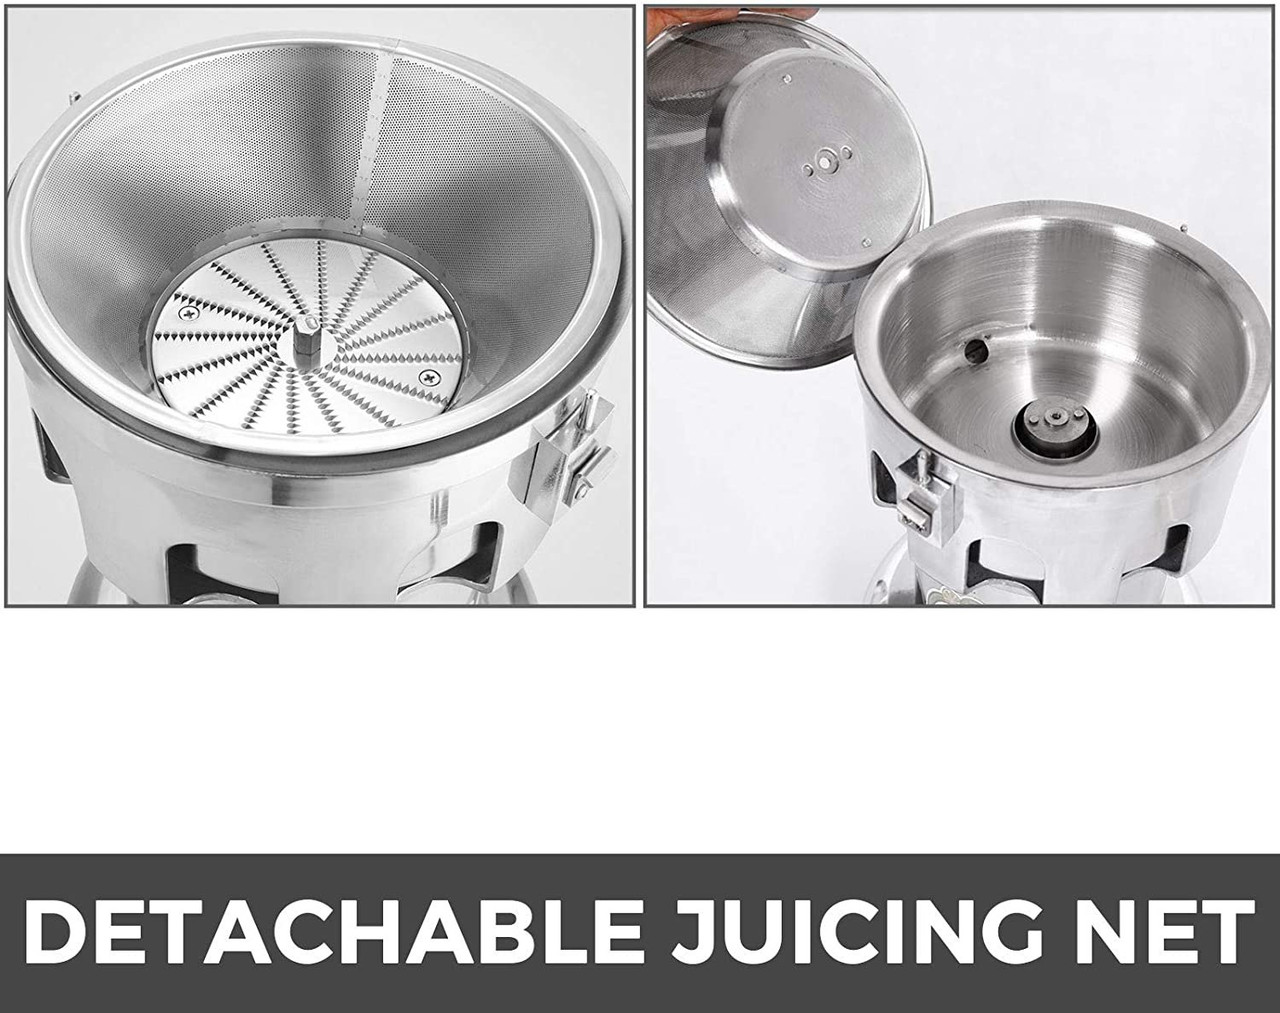 VEVOR Commercial Juice Extractor Heavy Duty Juicer Aluminum Casting and Stainless Steel Constructed Centrifugal Juice Extractor Juicing both Fruit and Vegetable